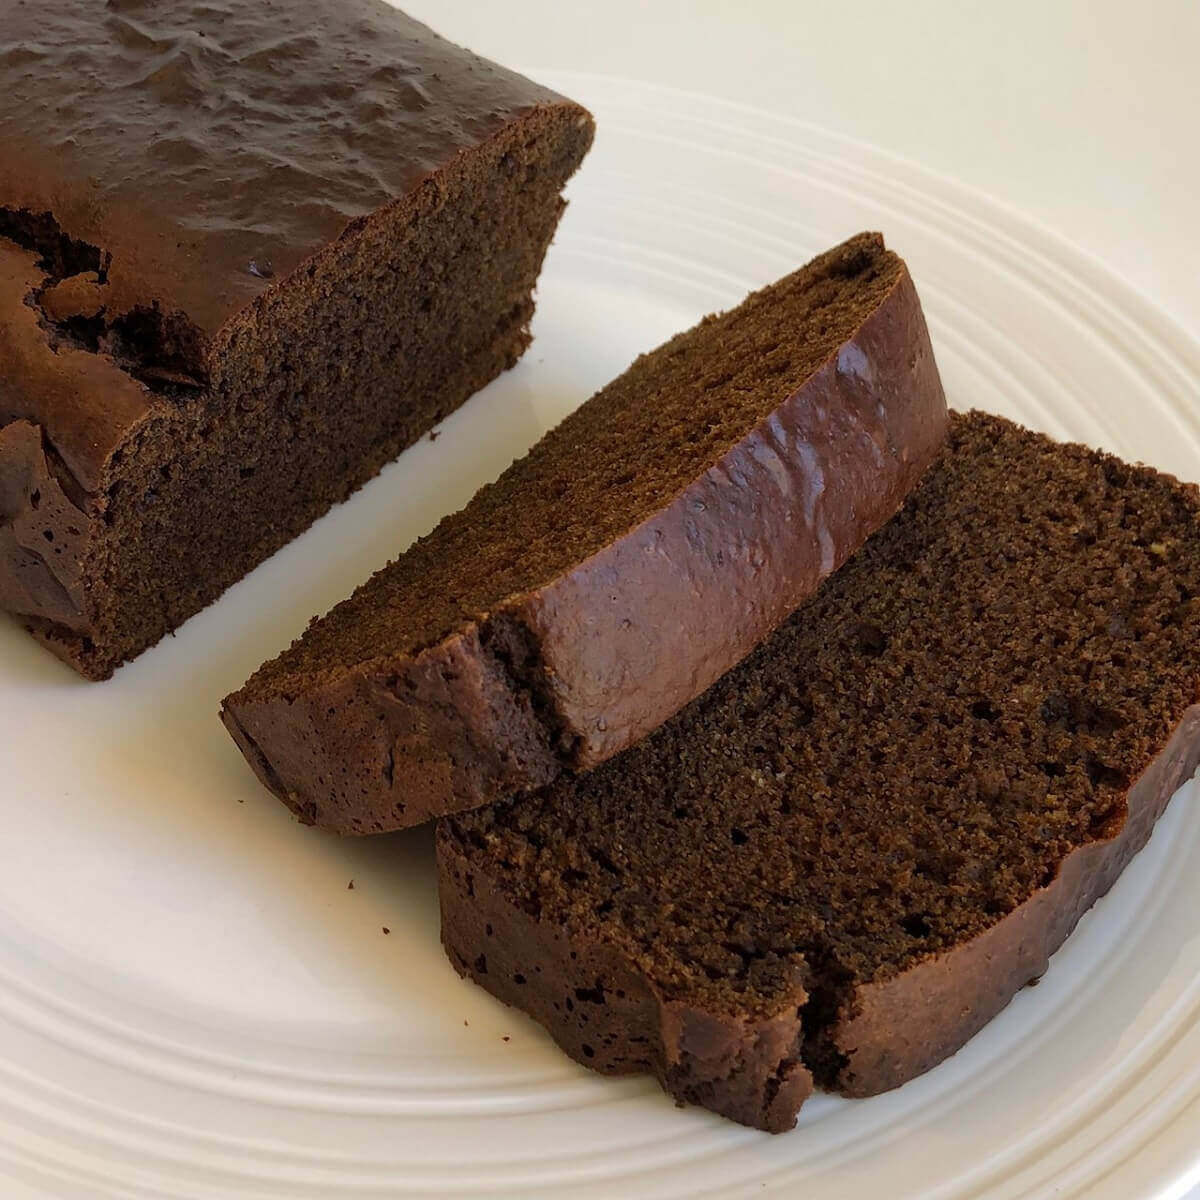 Gluten-free gingerbread cake with two slices cut on a plate.